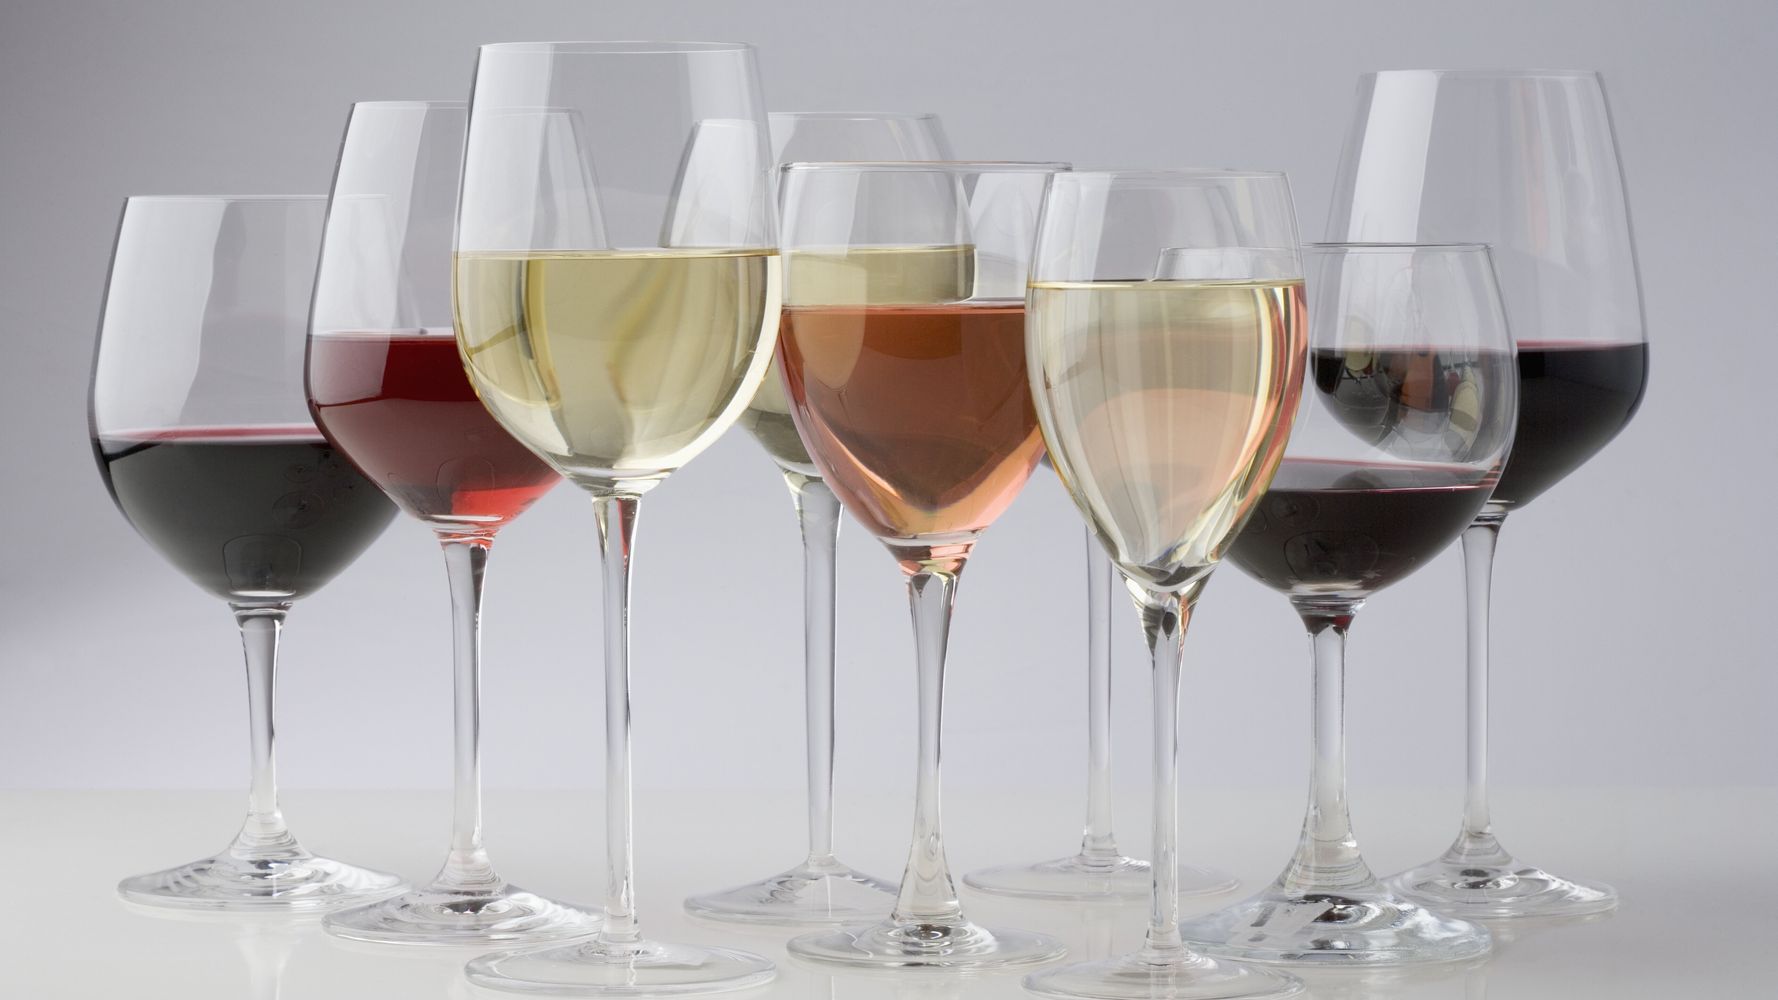 No need for a different shape glass for each wine type, but thin rim